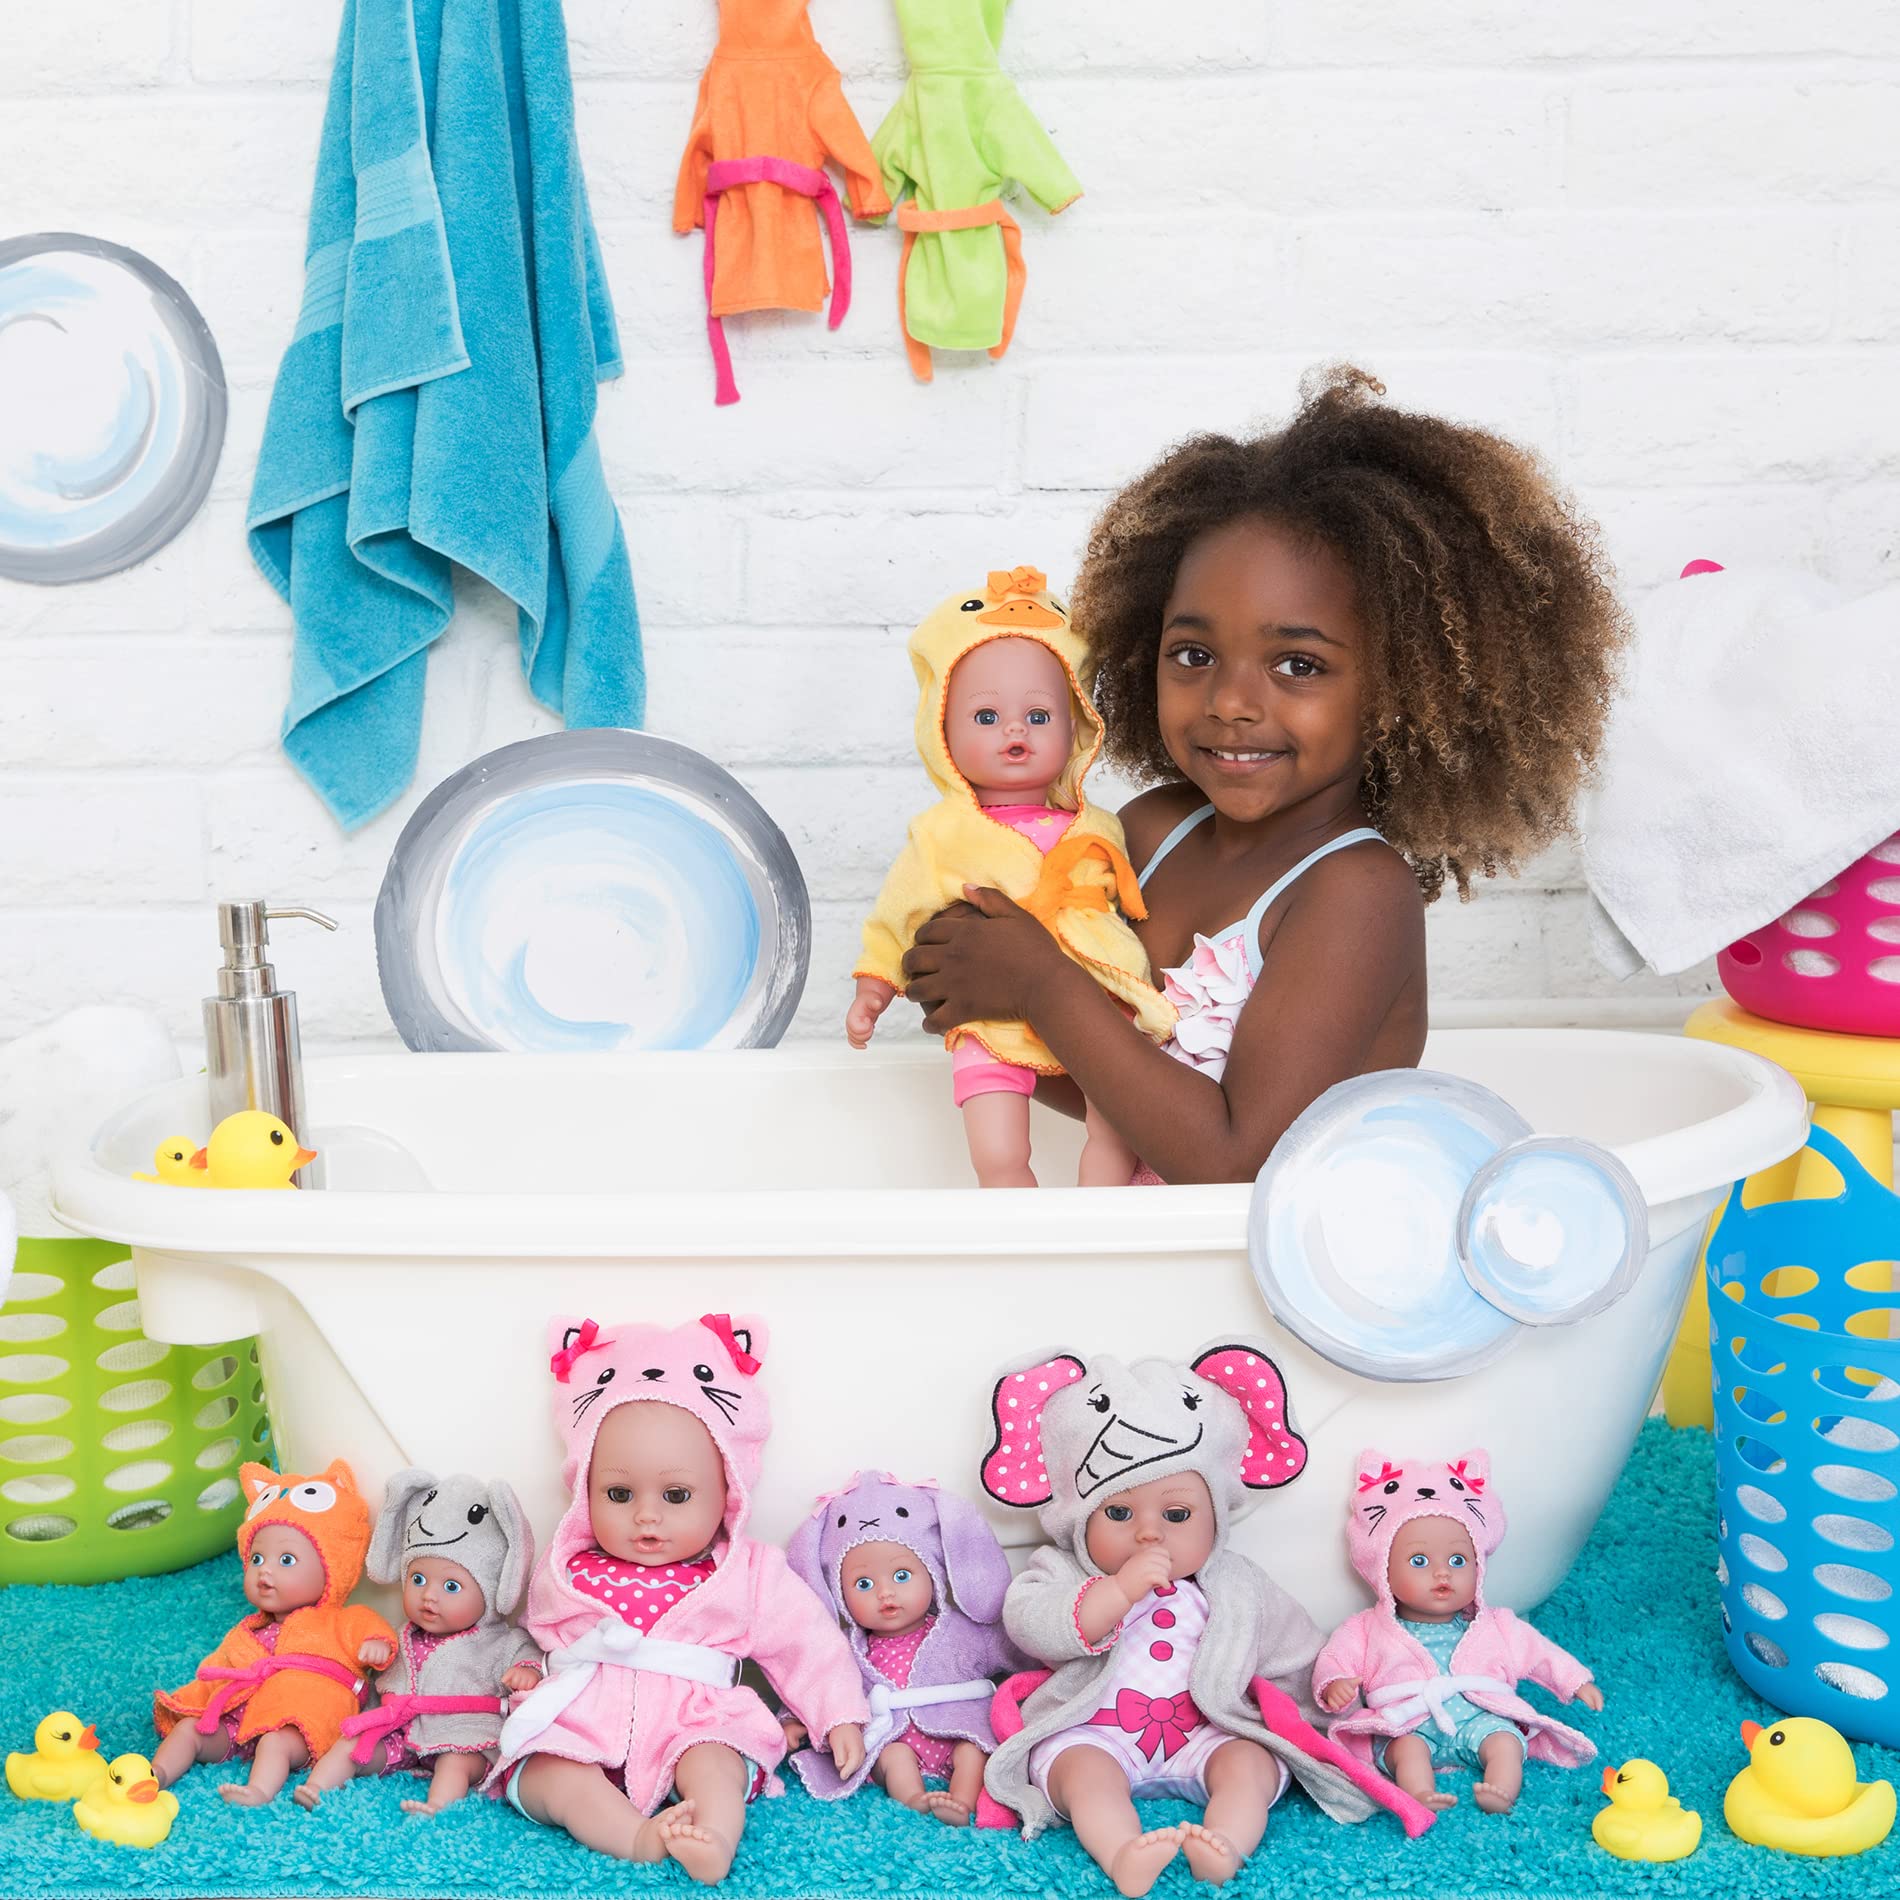 Adora BathTime Ducky Baby Doll, Doll Clothes & Accessories Set